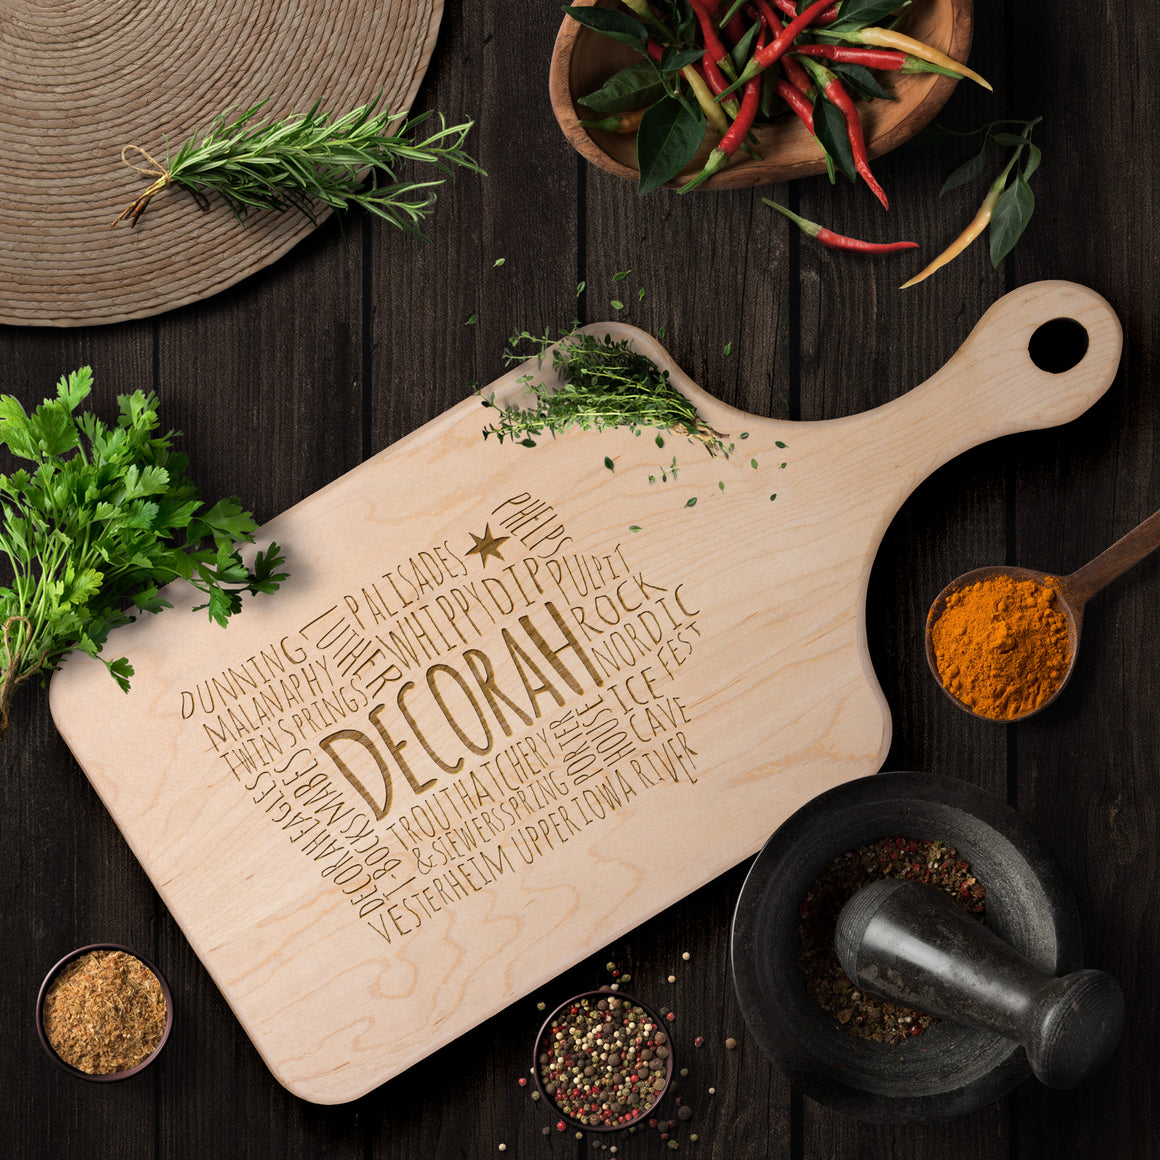 Decorah Cutting Board with Handle Word Map, Maple